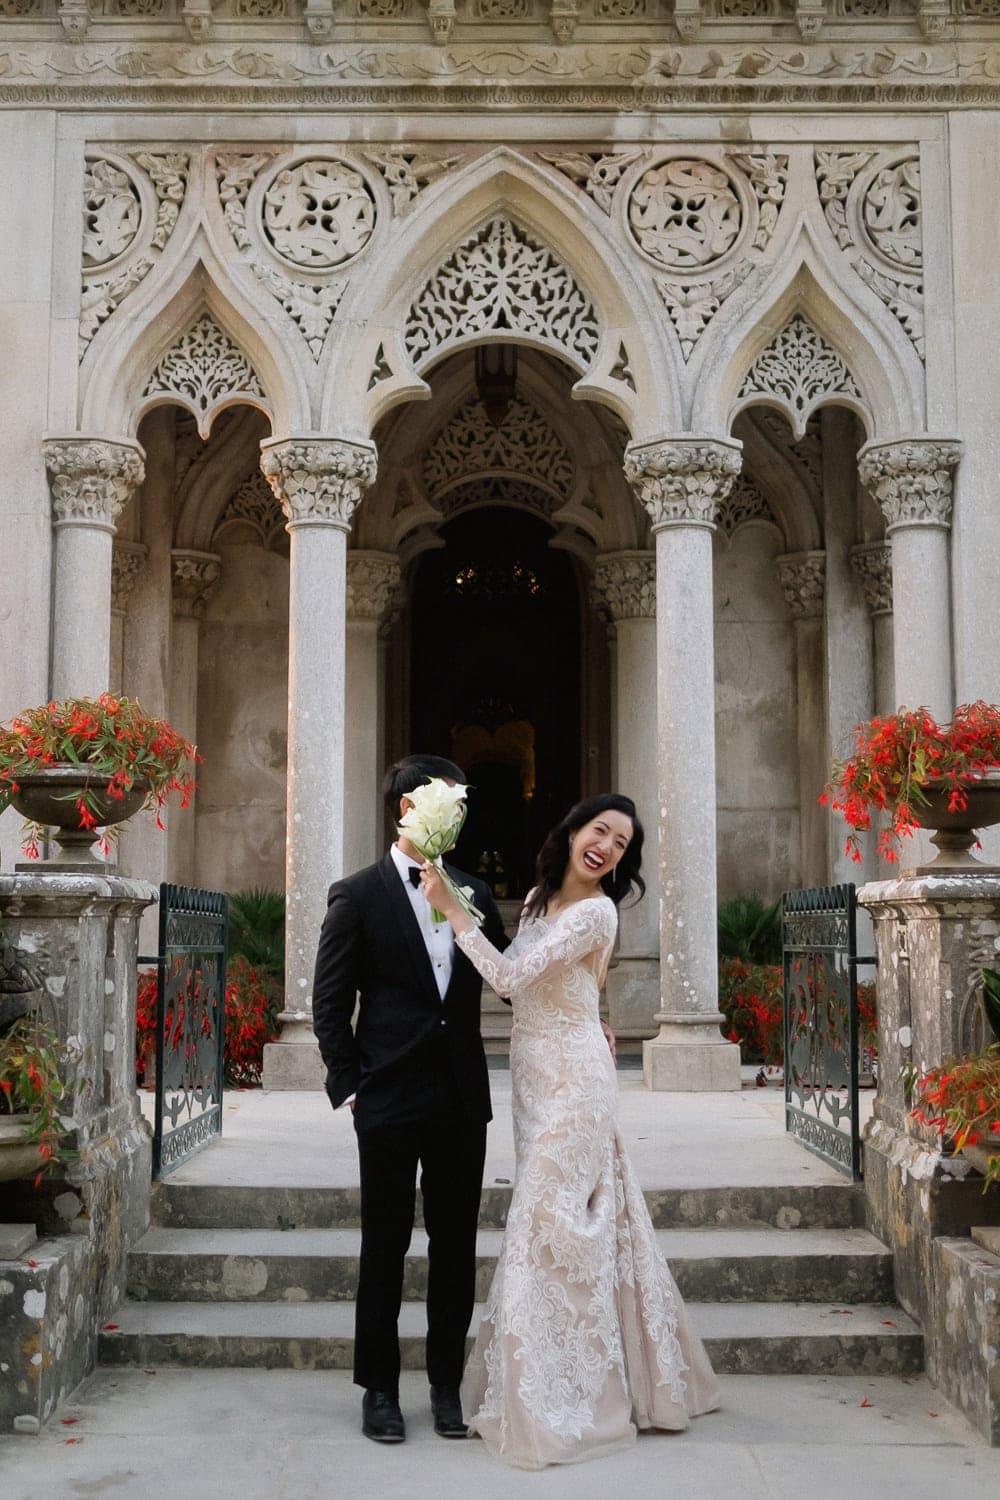 An American wedding at Monserrate Palace in Sintra